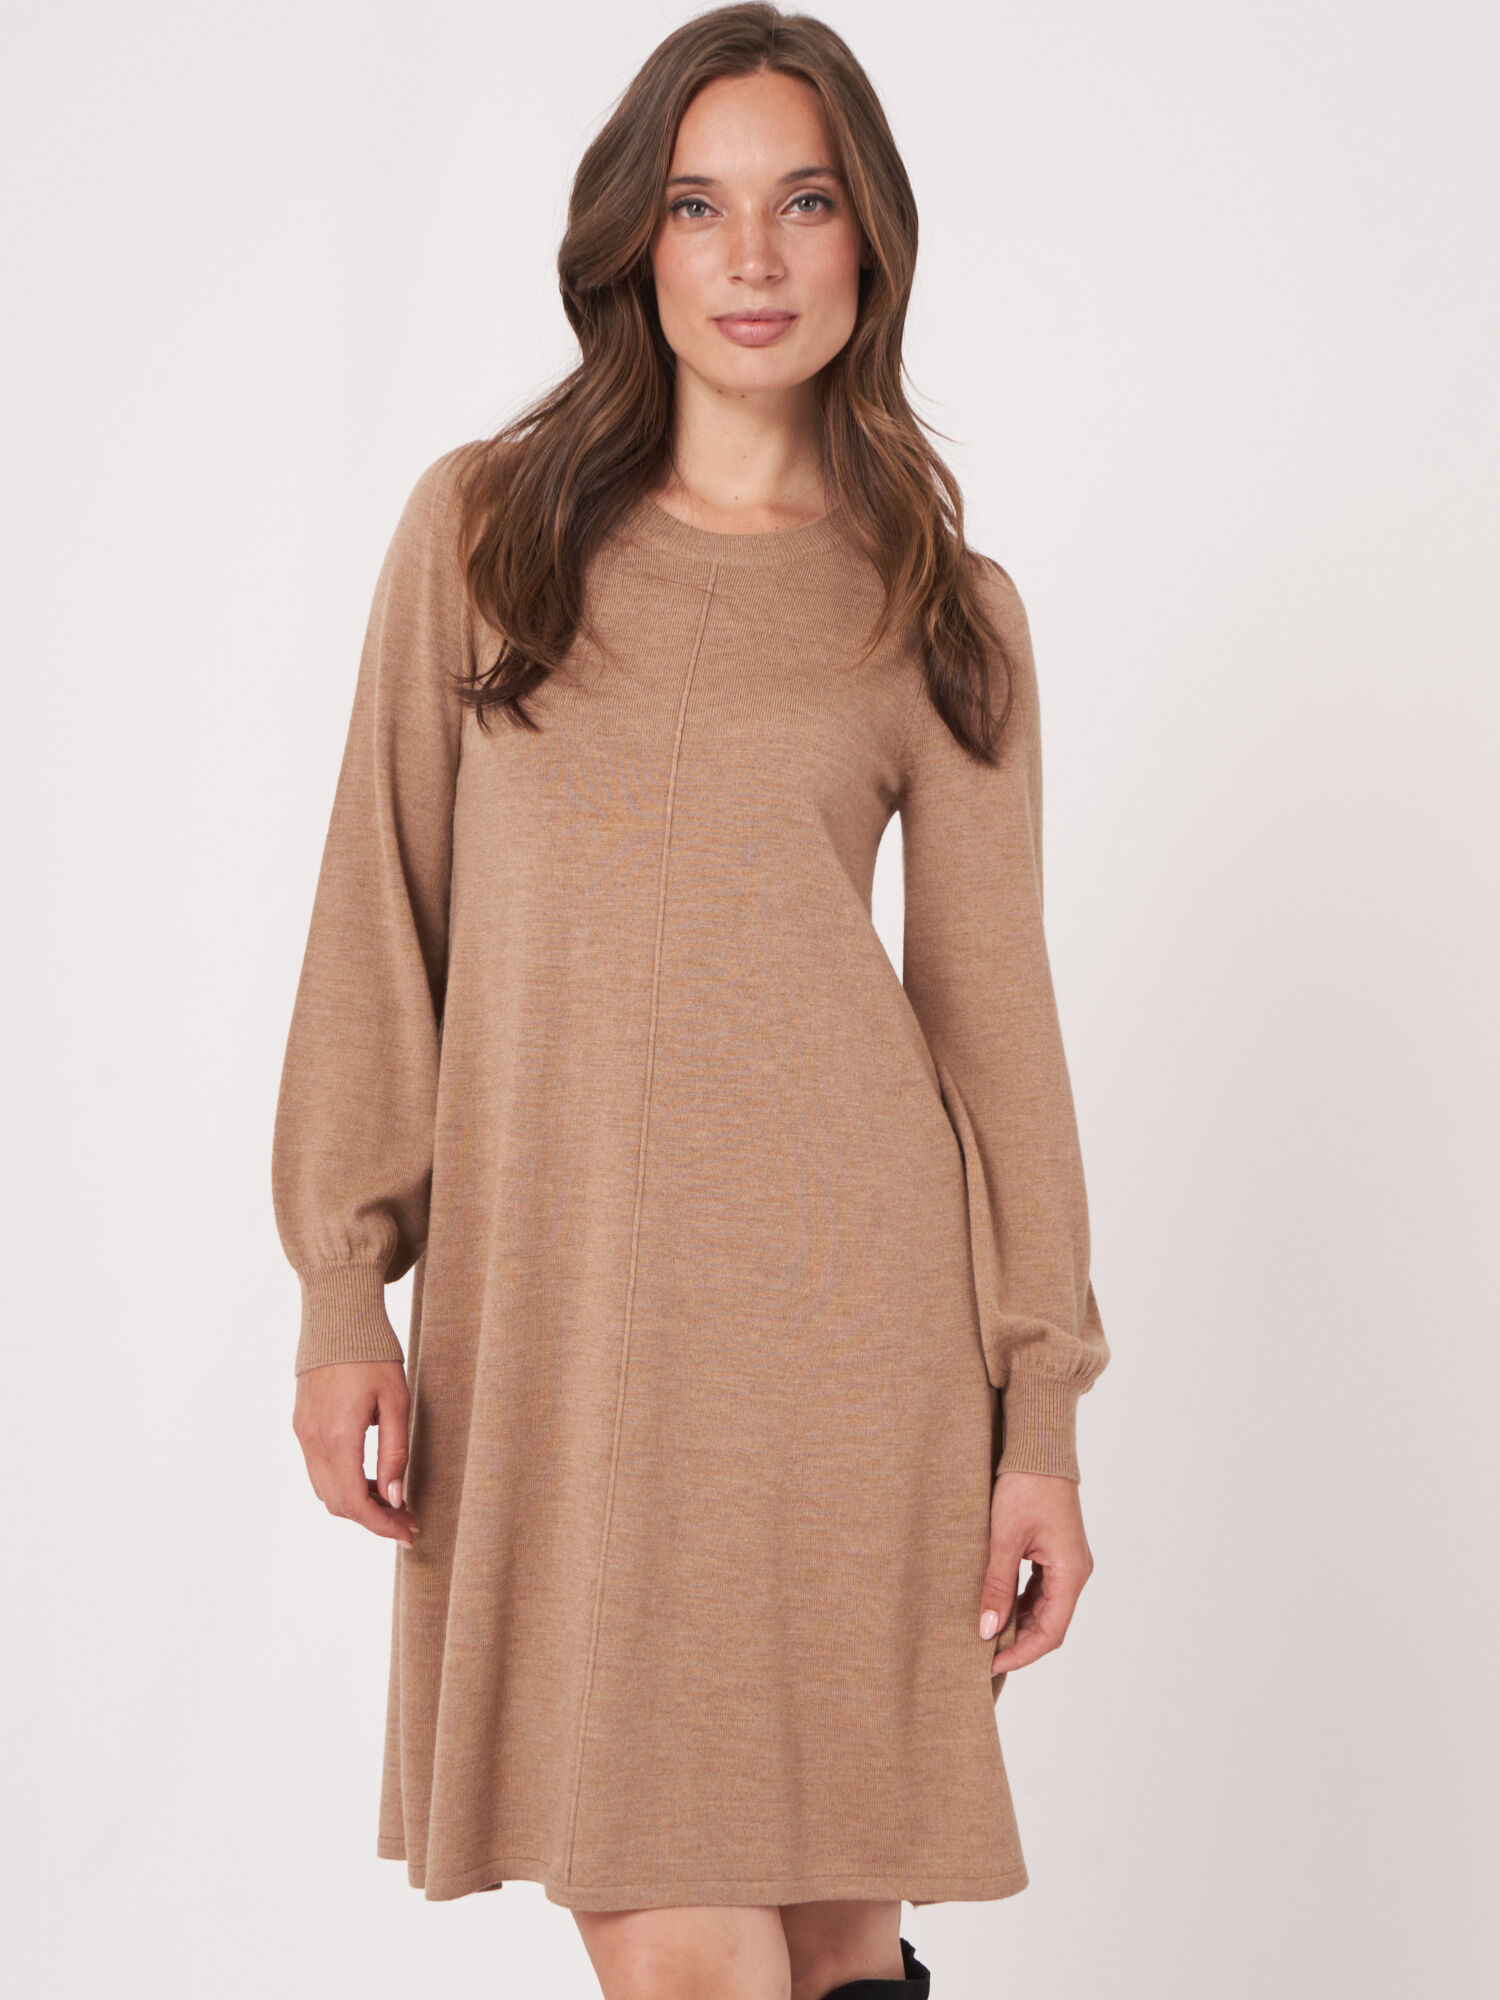 Women's A line merino wool dress with puff sleeves   REPEAT cashmere